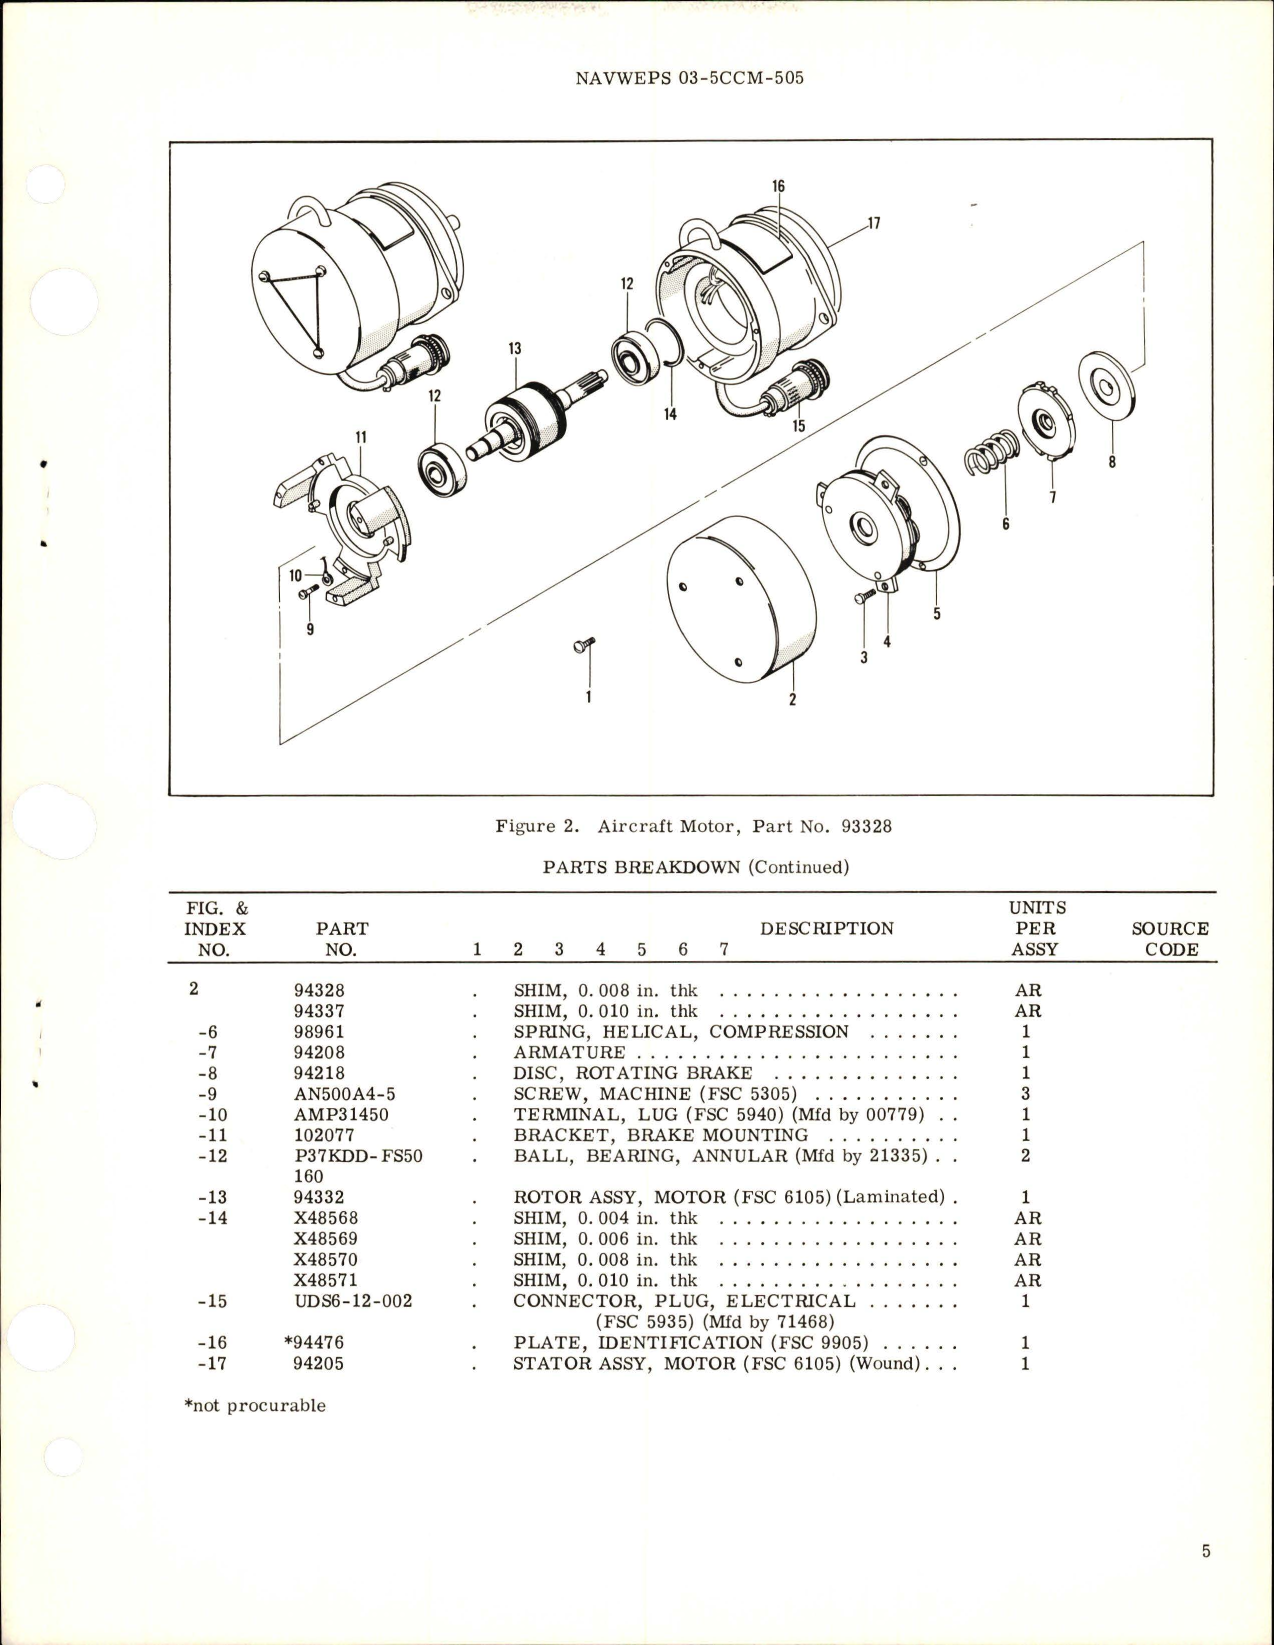 Sample page 5 from AirCorps Library document: Overhaul Instructions with Parts Breakdown for Aircraft Motor - Part 93328, 400712, and 404343